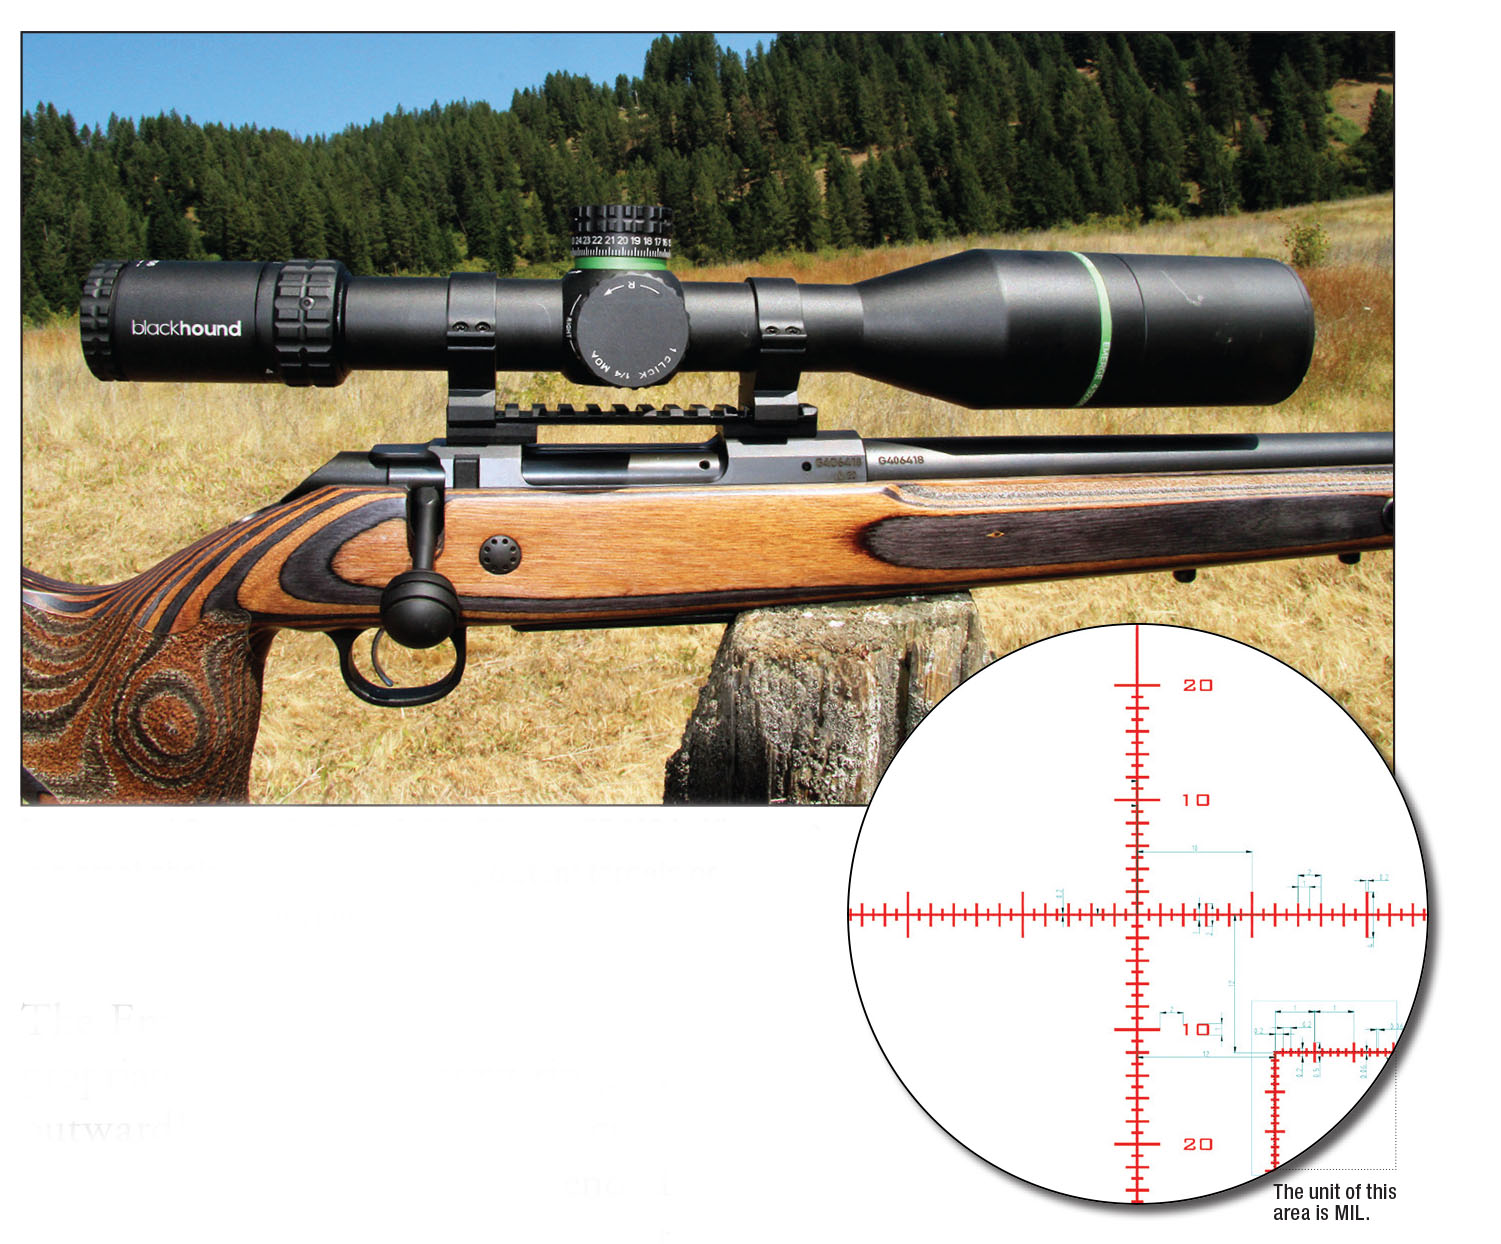 Blackhound Optics’ Emerge 4-32x 56mm FFP MOA riflescope is a great choice whether engaging distant targets or shooting small burrowing rodents.